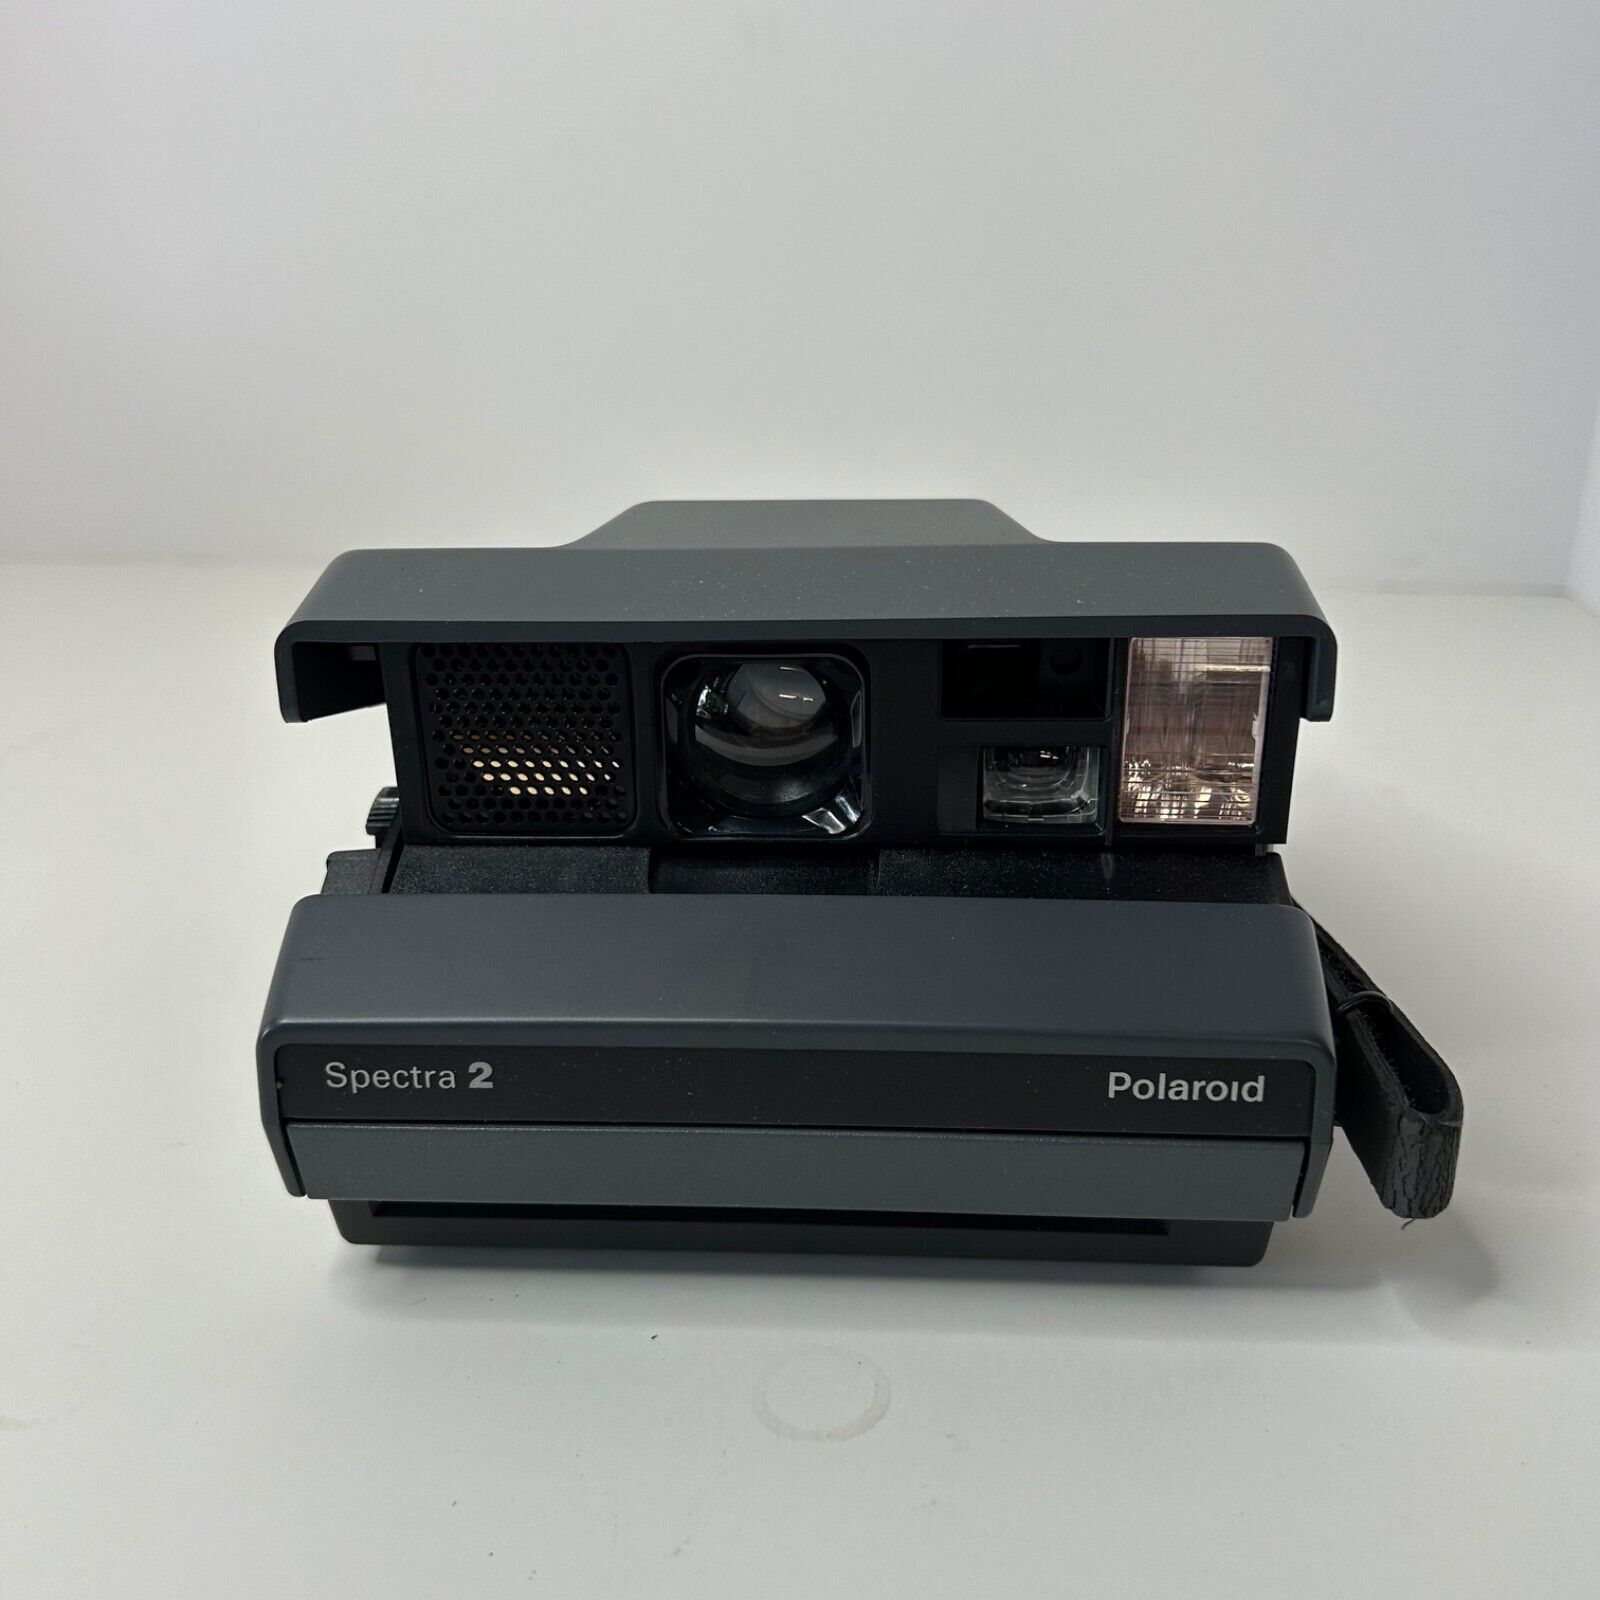 Polaroid Spectra 2 Instant Camera UNTESTED FREE SHIPPING - $17.78